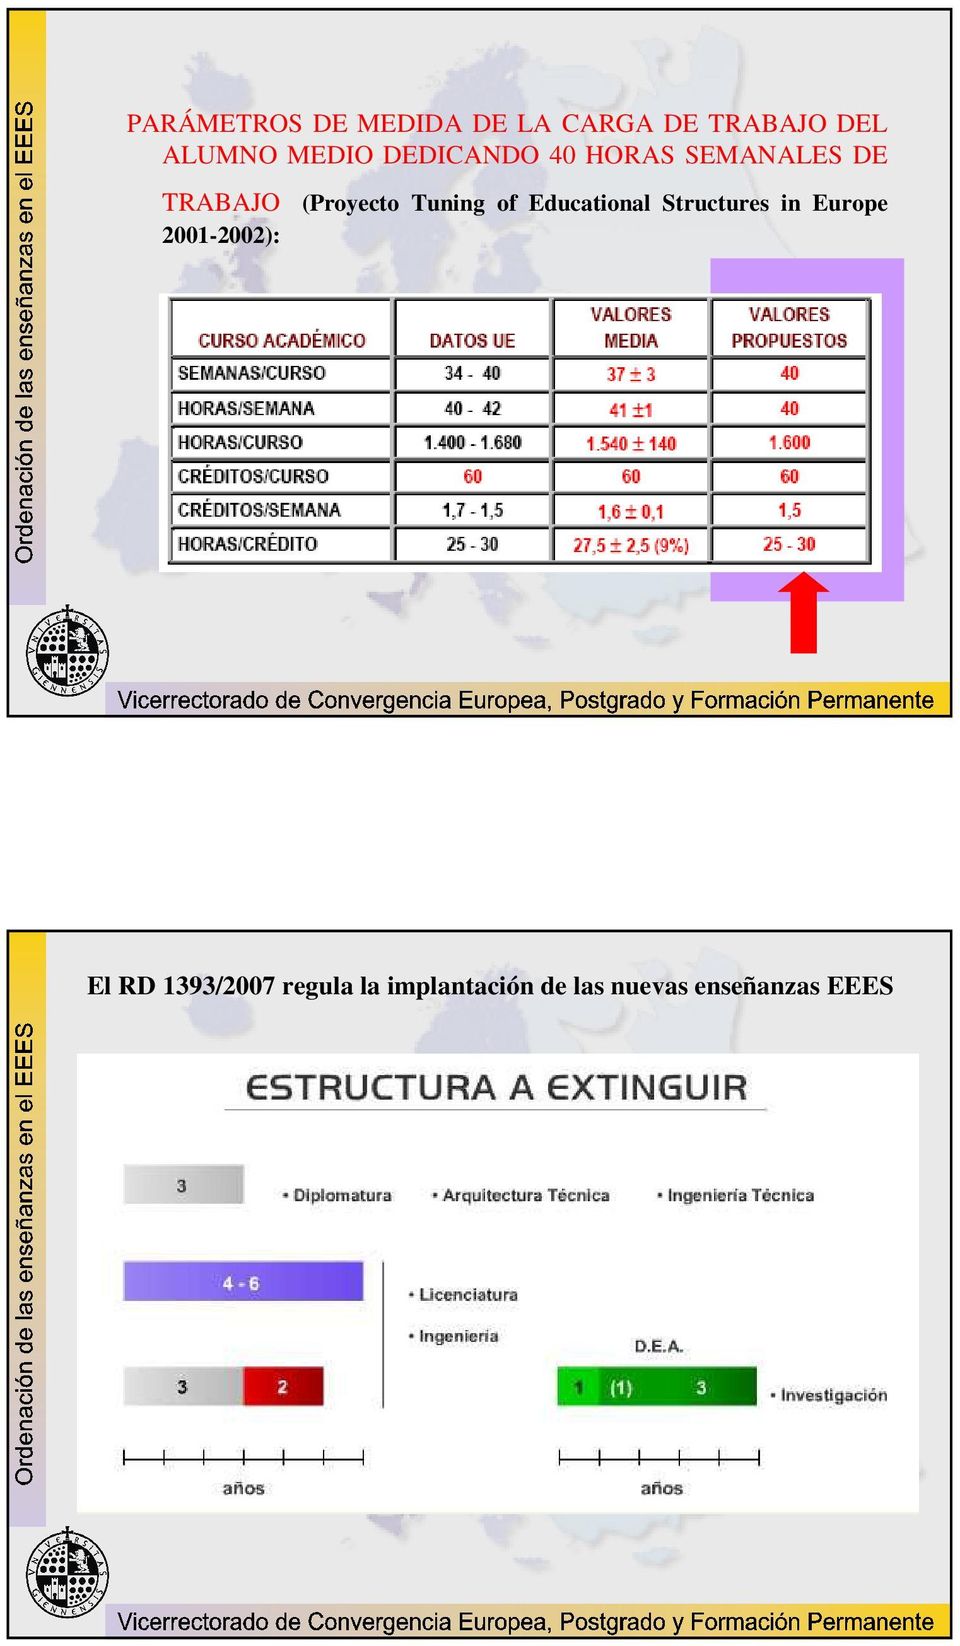 (Proyecto Tuning of Educational Structures in Europe El RD